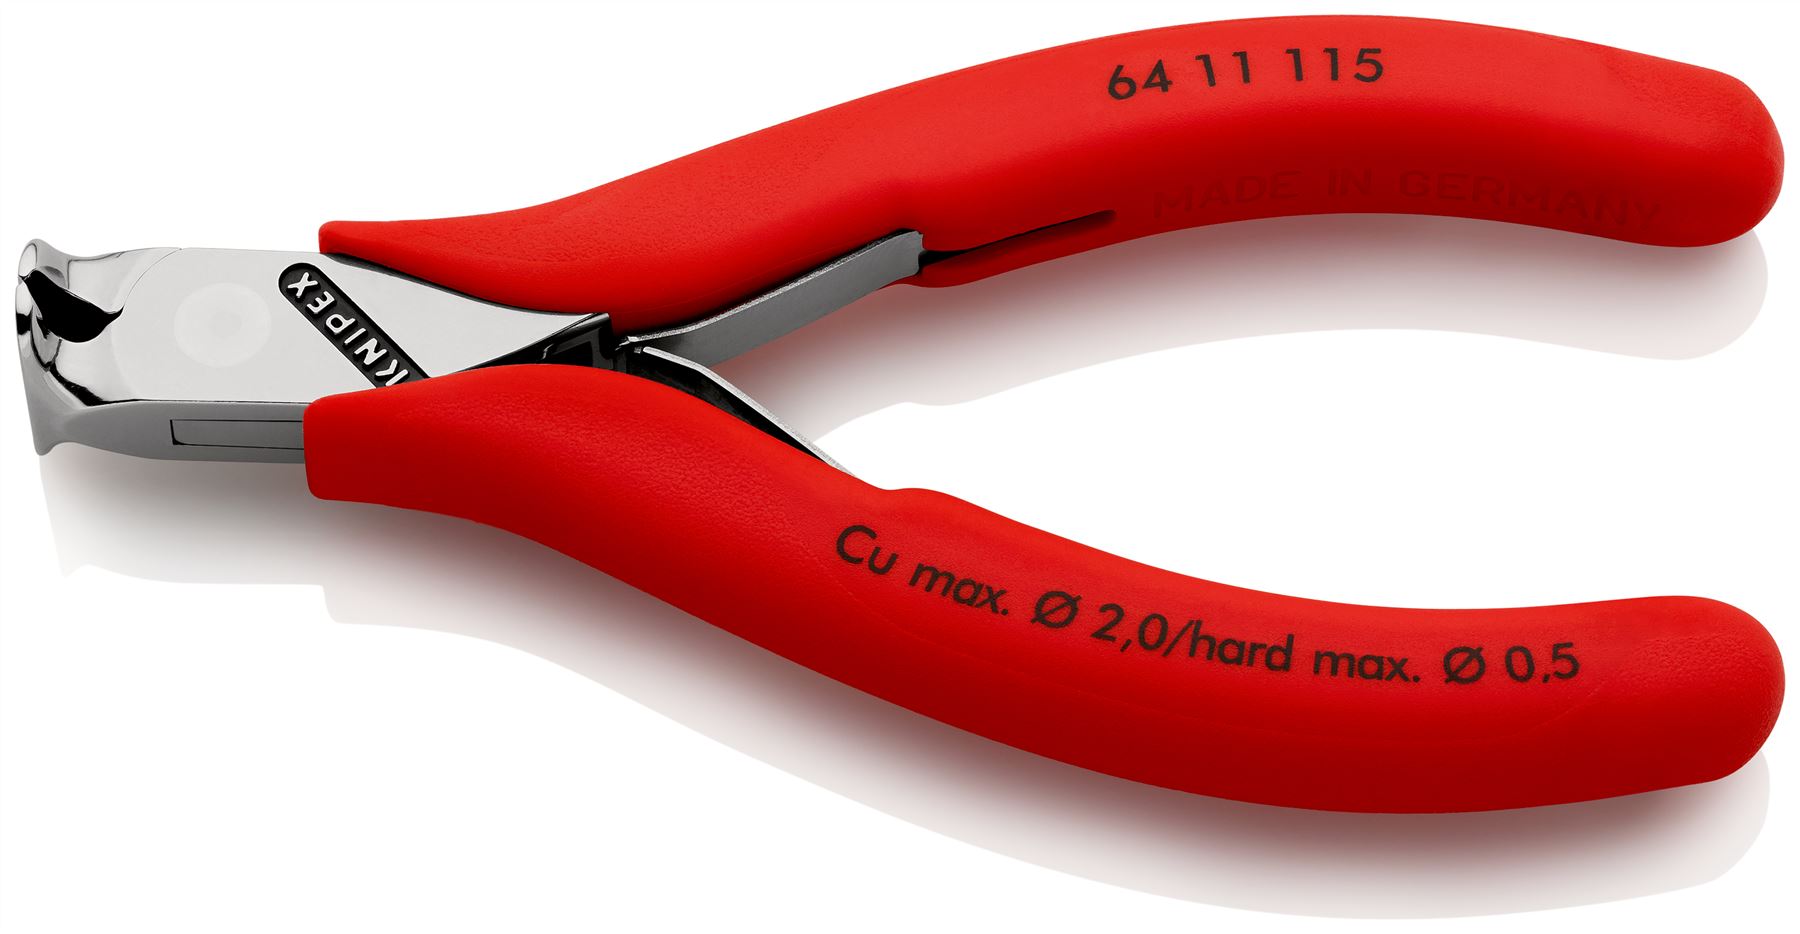 KNIPEX Precision Electronics End Cutting Nipper Pliers 115mm Plastic Coated 64 11 115